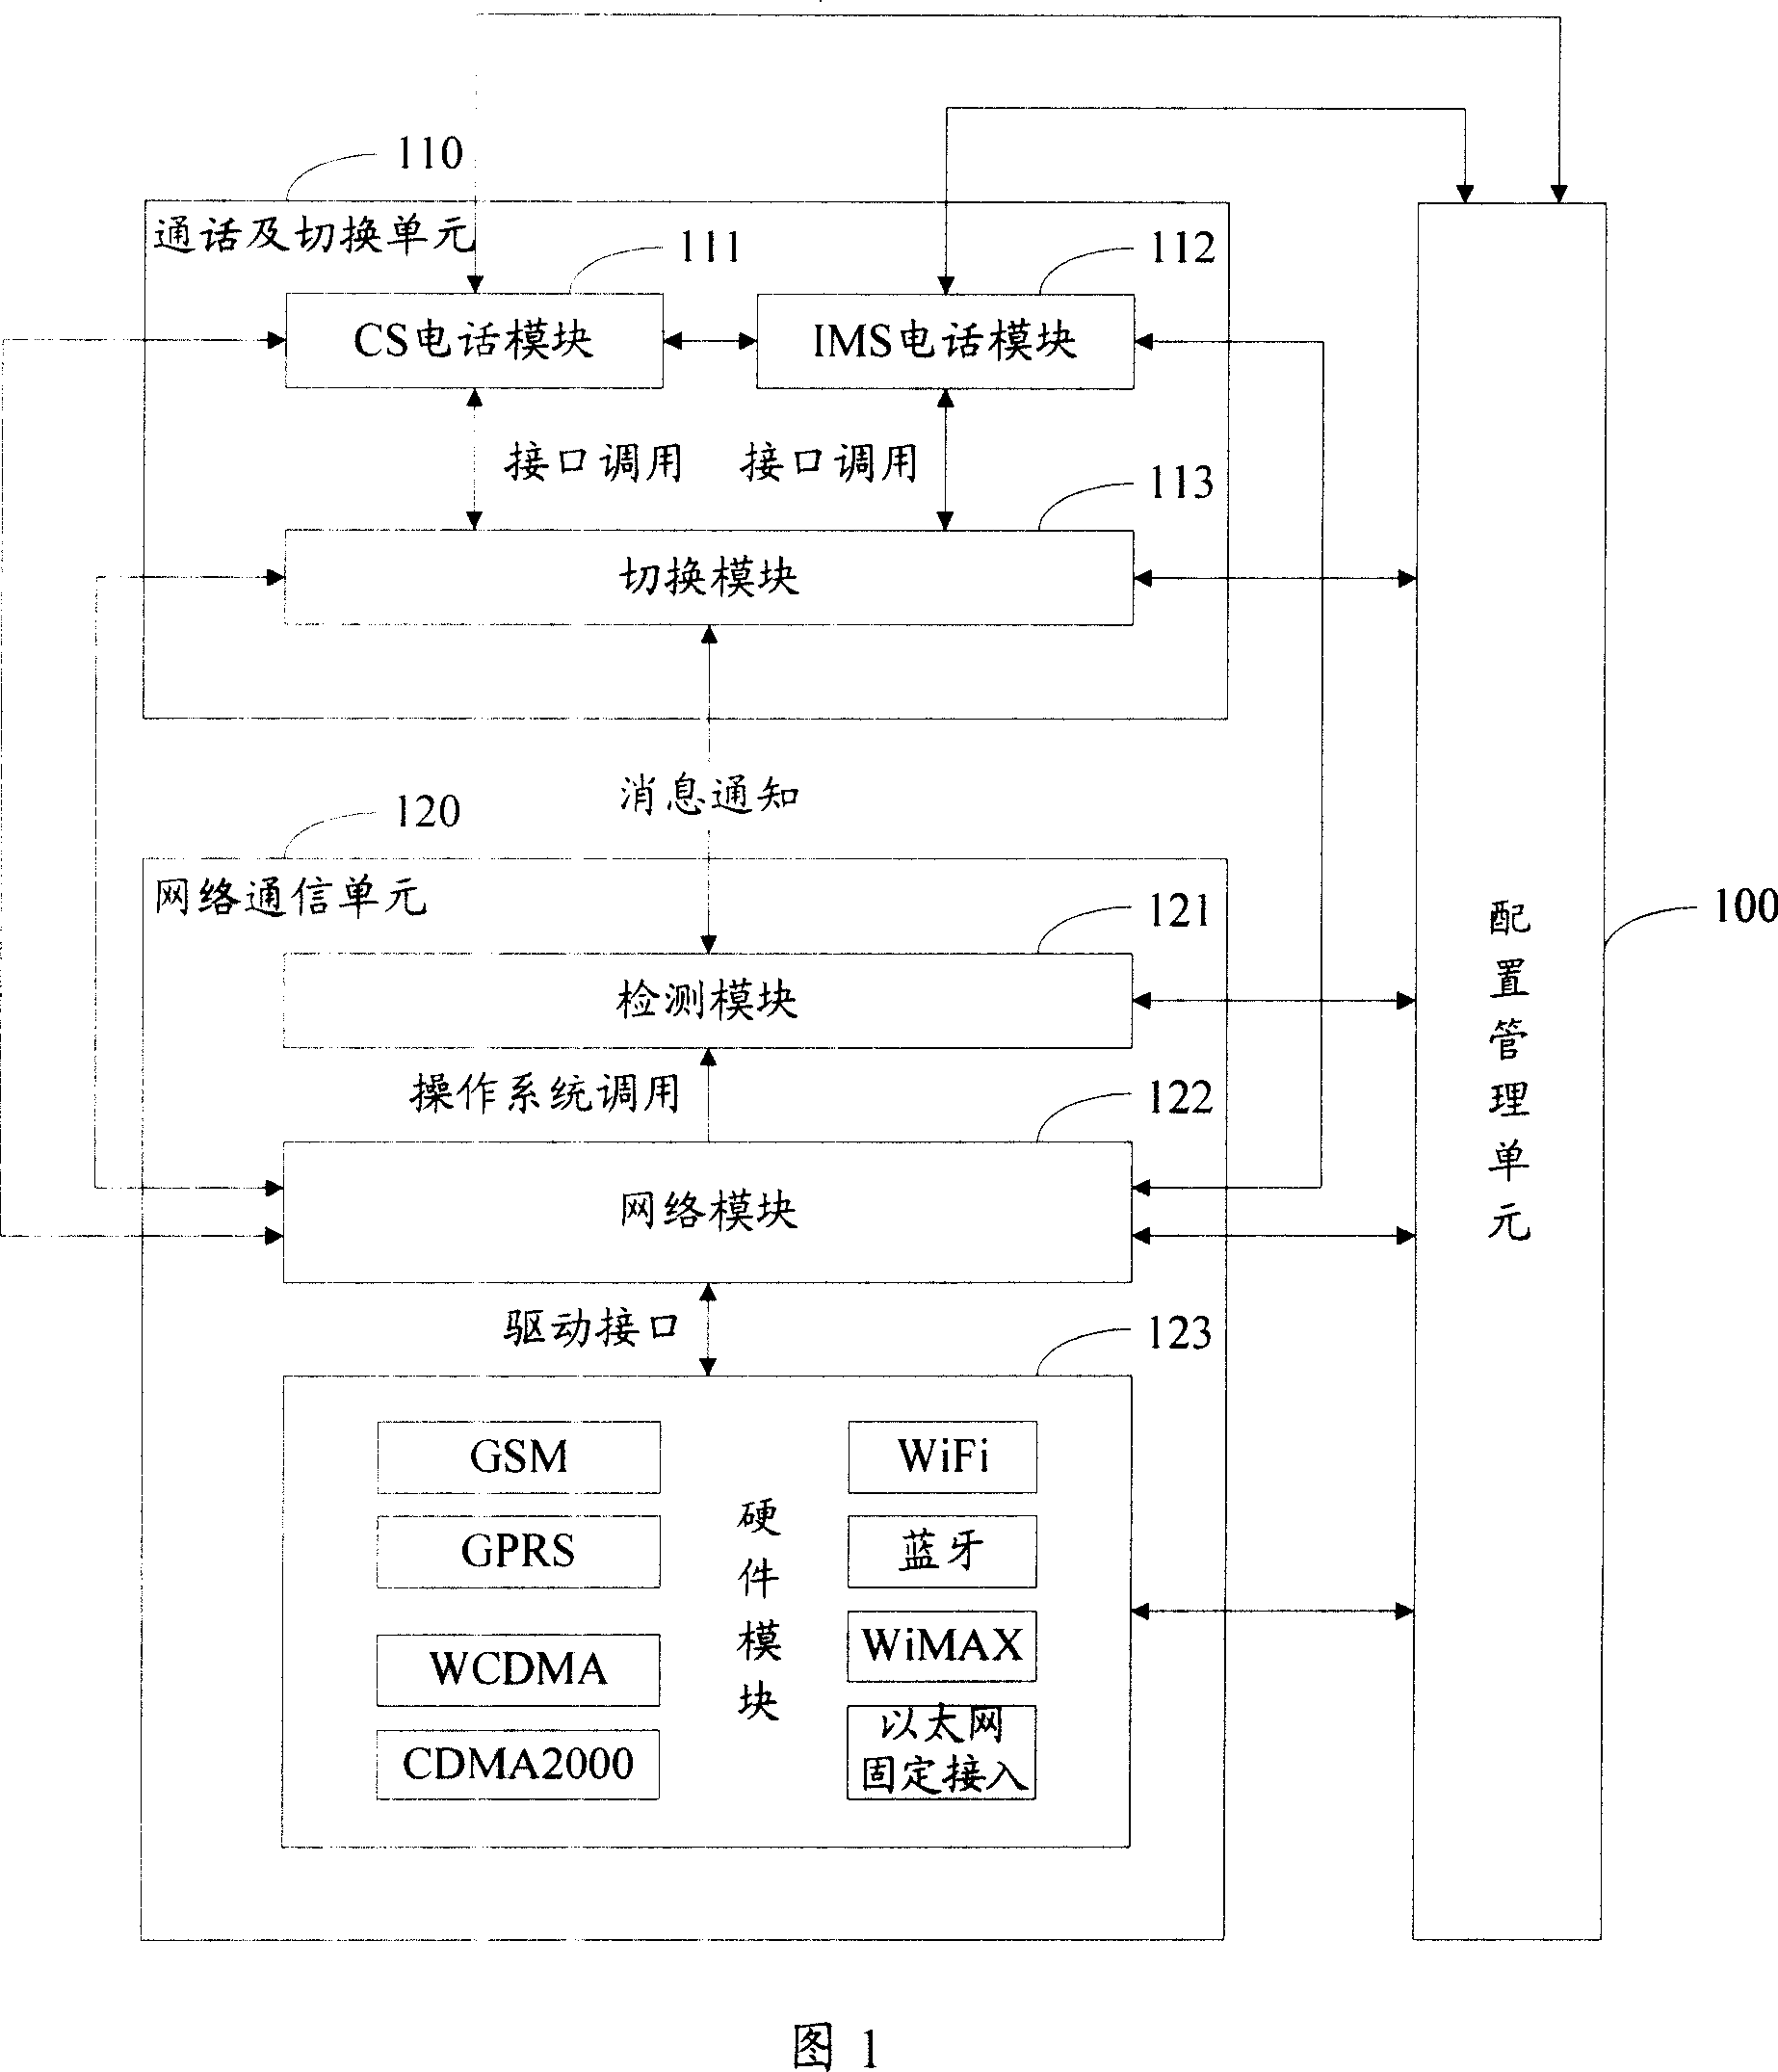 Terminal and method for realizing seamless switching among different communication network